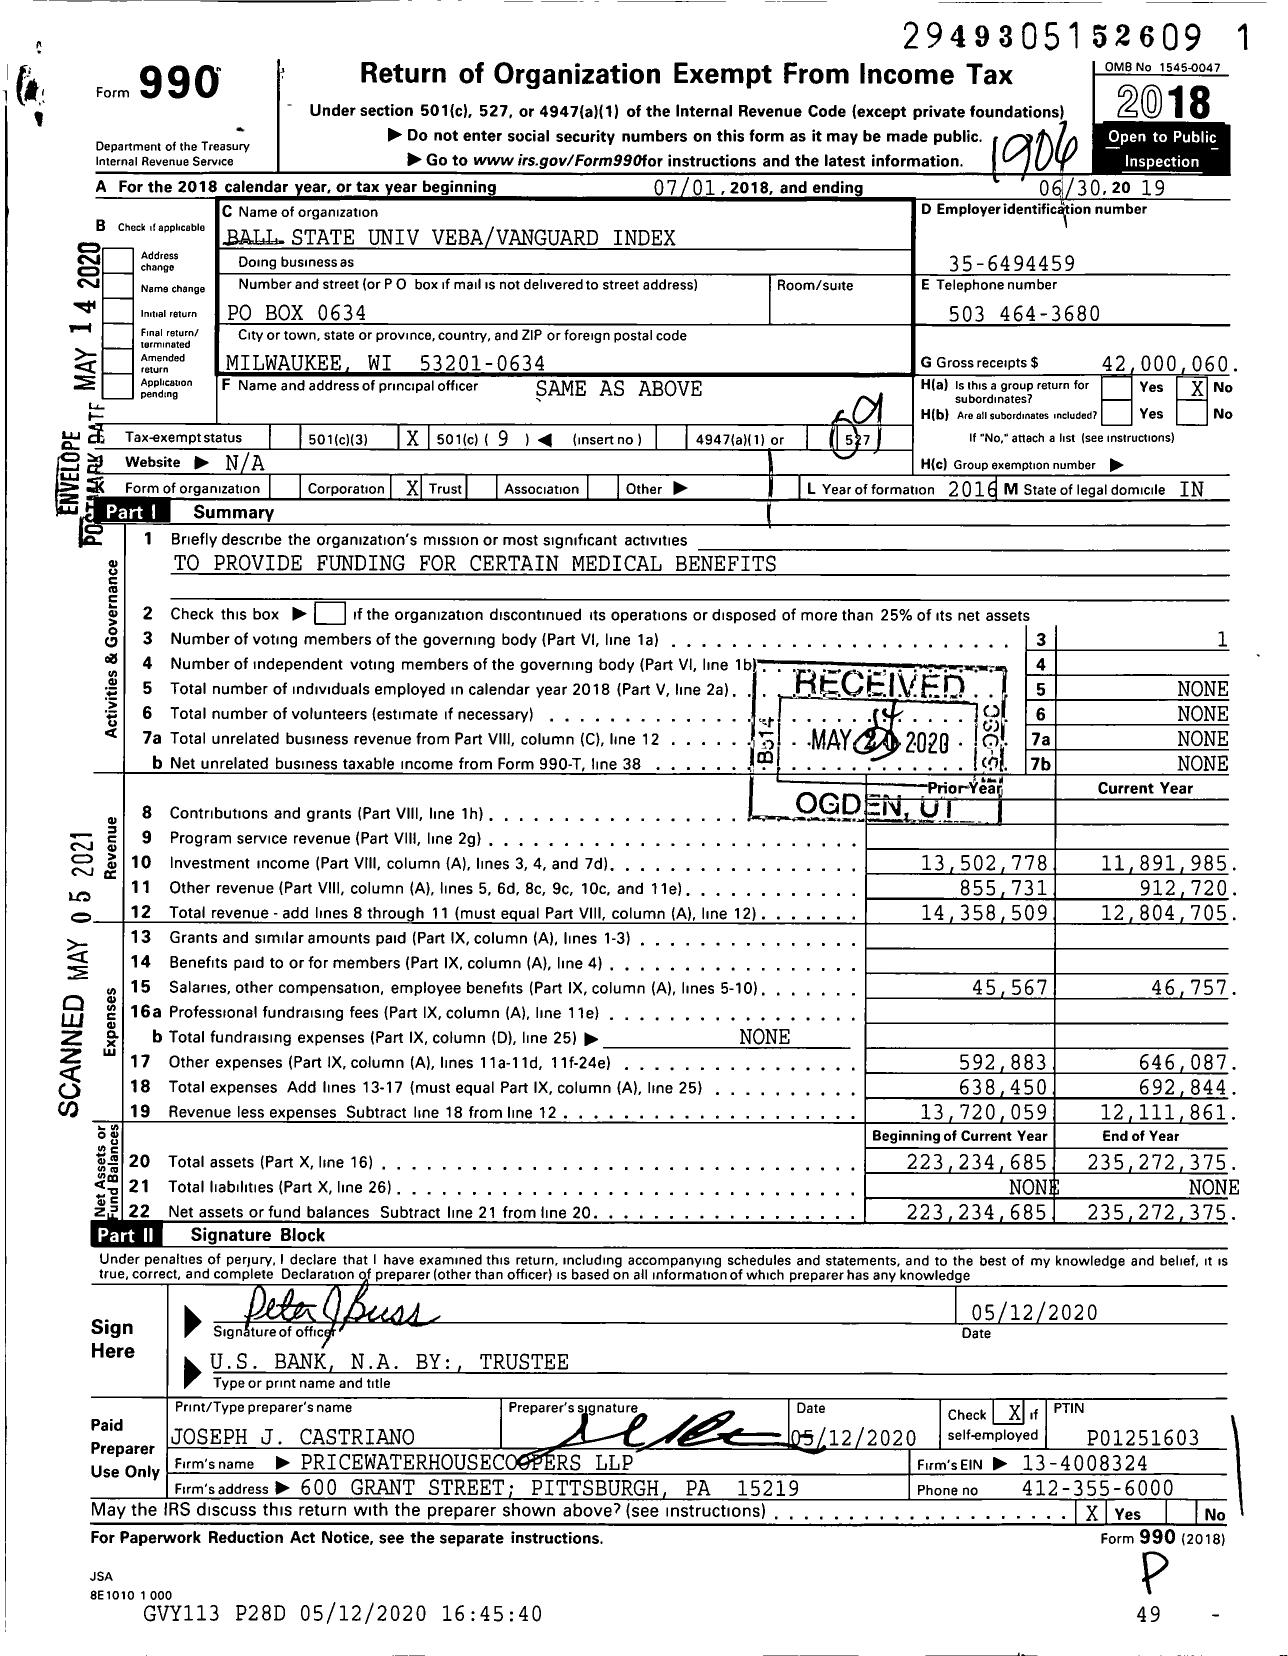 Image of first page of 2018 Form 990O for Ball State University Veba Vanguard Index